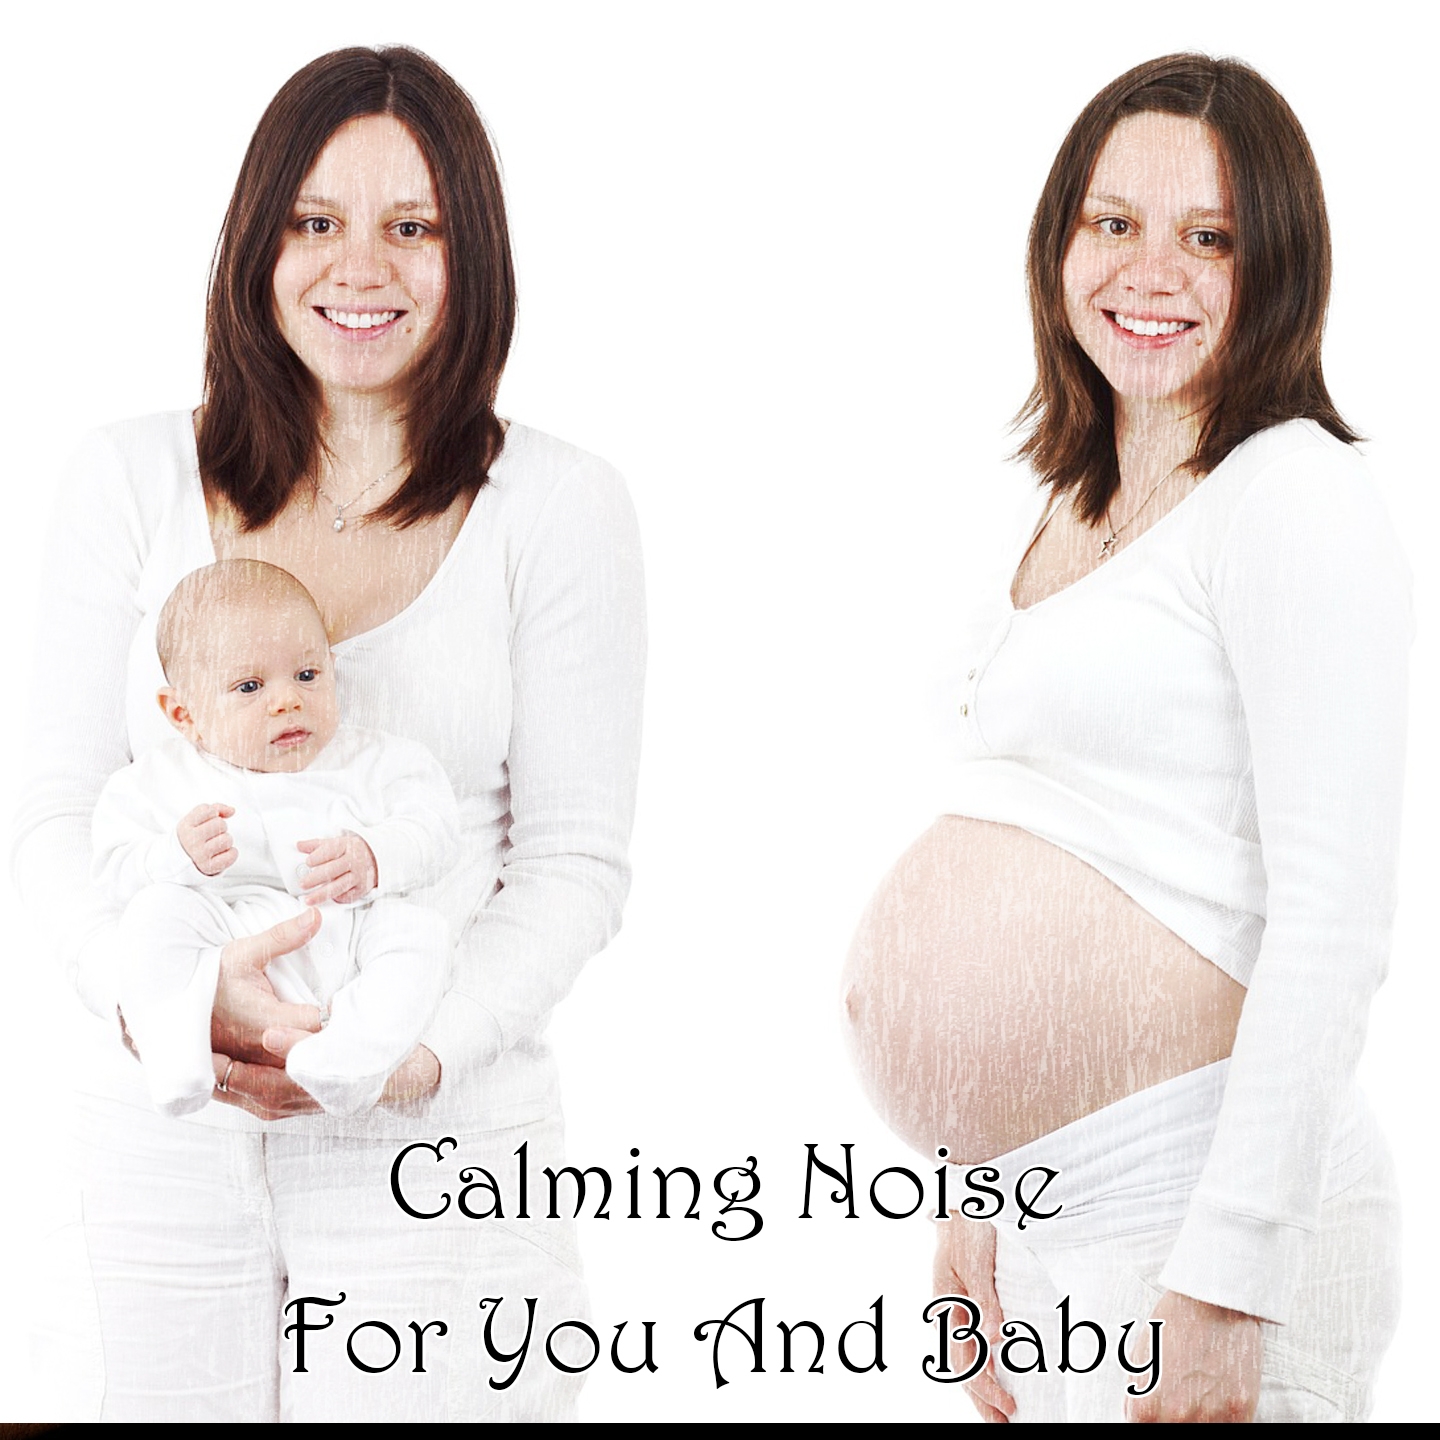 Calming Noise For You And Baby